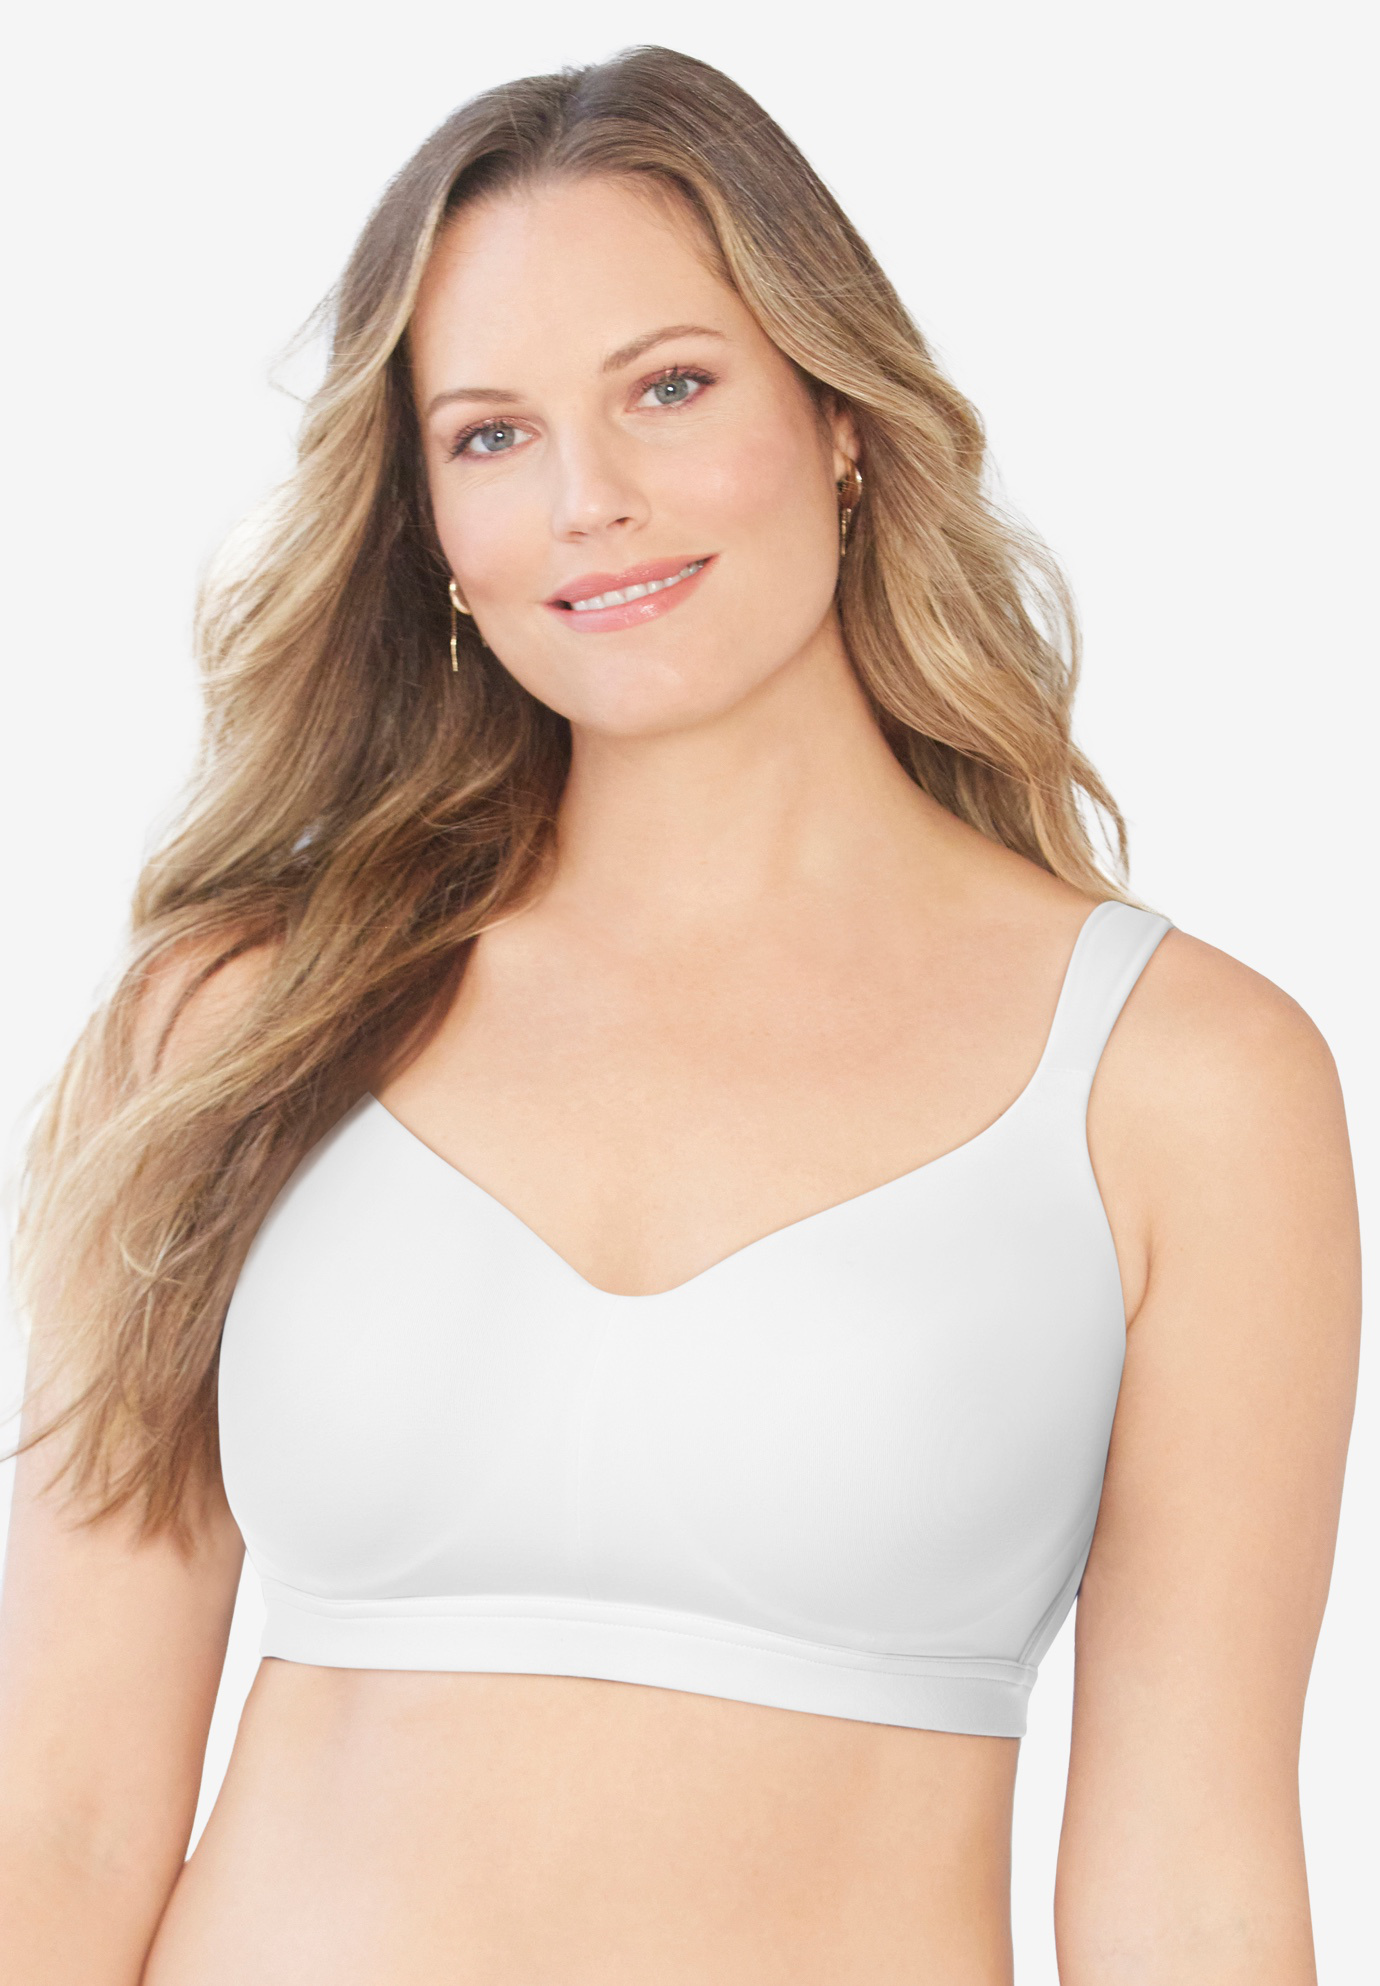 Bestform 5006233 Floral Trim Wireless Cotton Bra with Lightly-Lined Cups